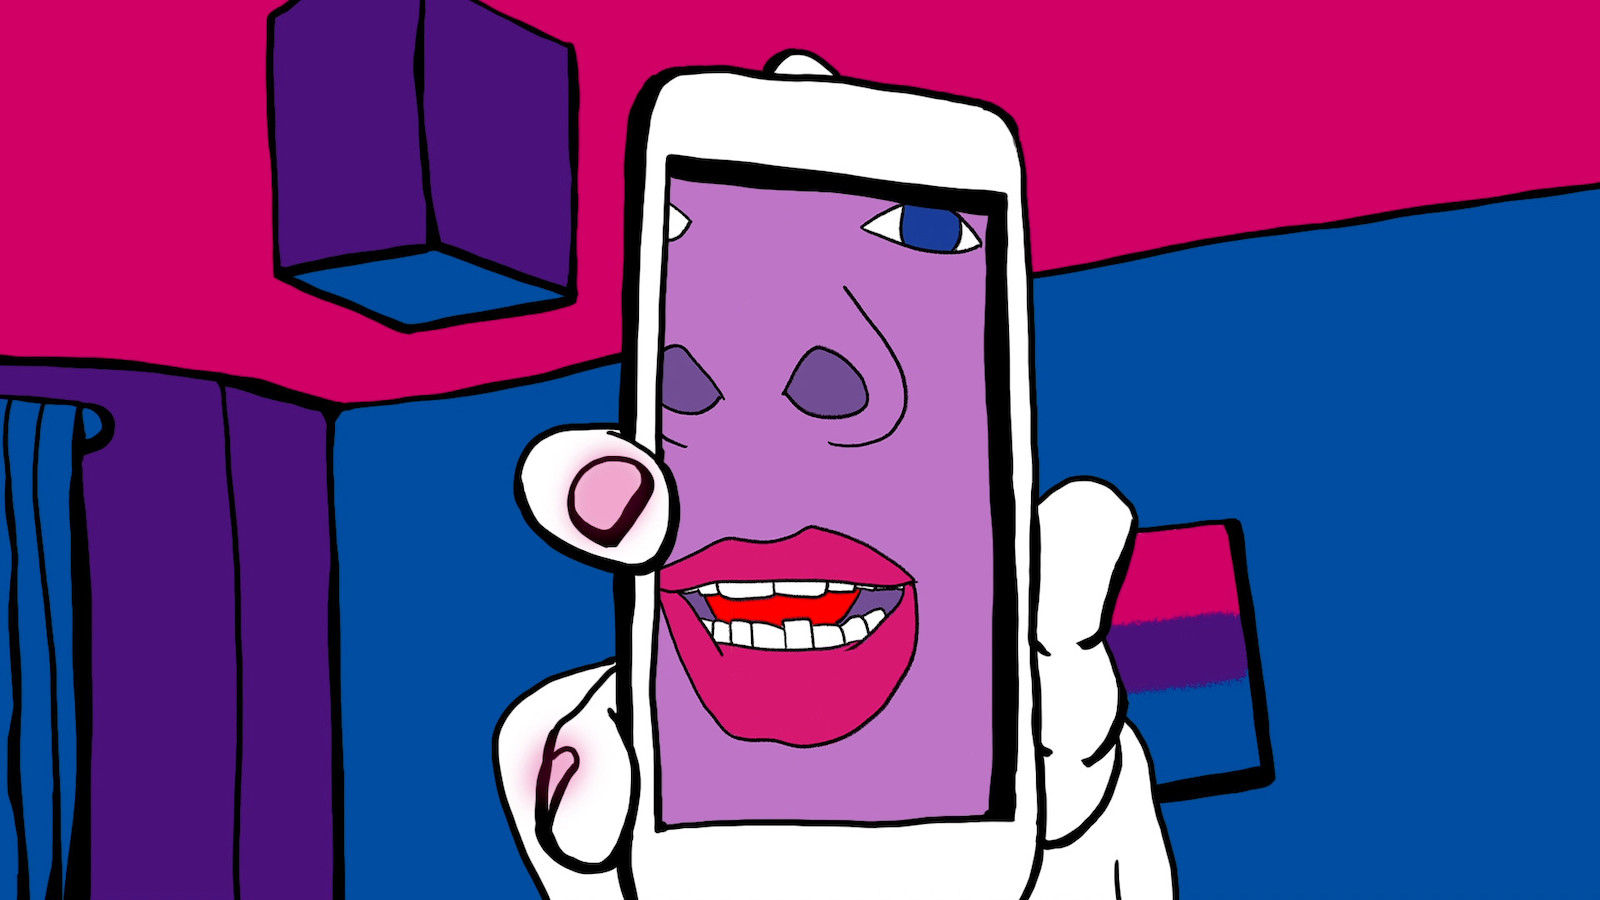 An animated image of a hand holding a cell phone, with an image of a face mirrored on the phone. The colors are blue and purple.